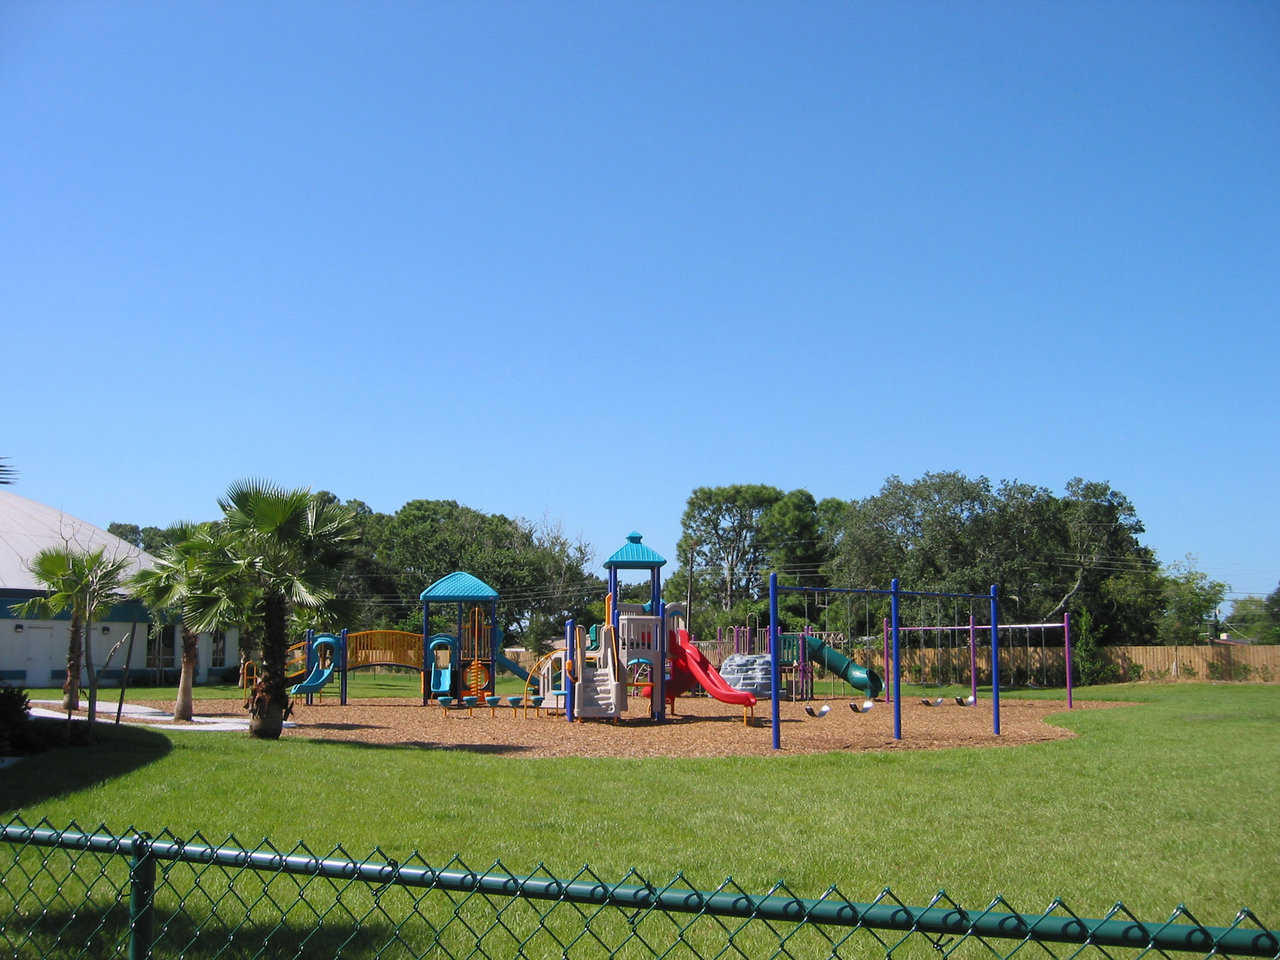 Play time — The Academy’s campus includes a well equipped, safe playground.